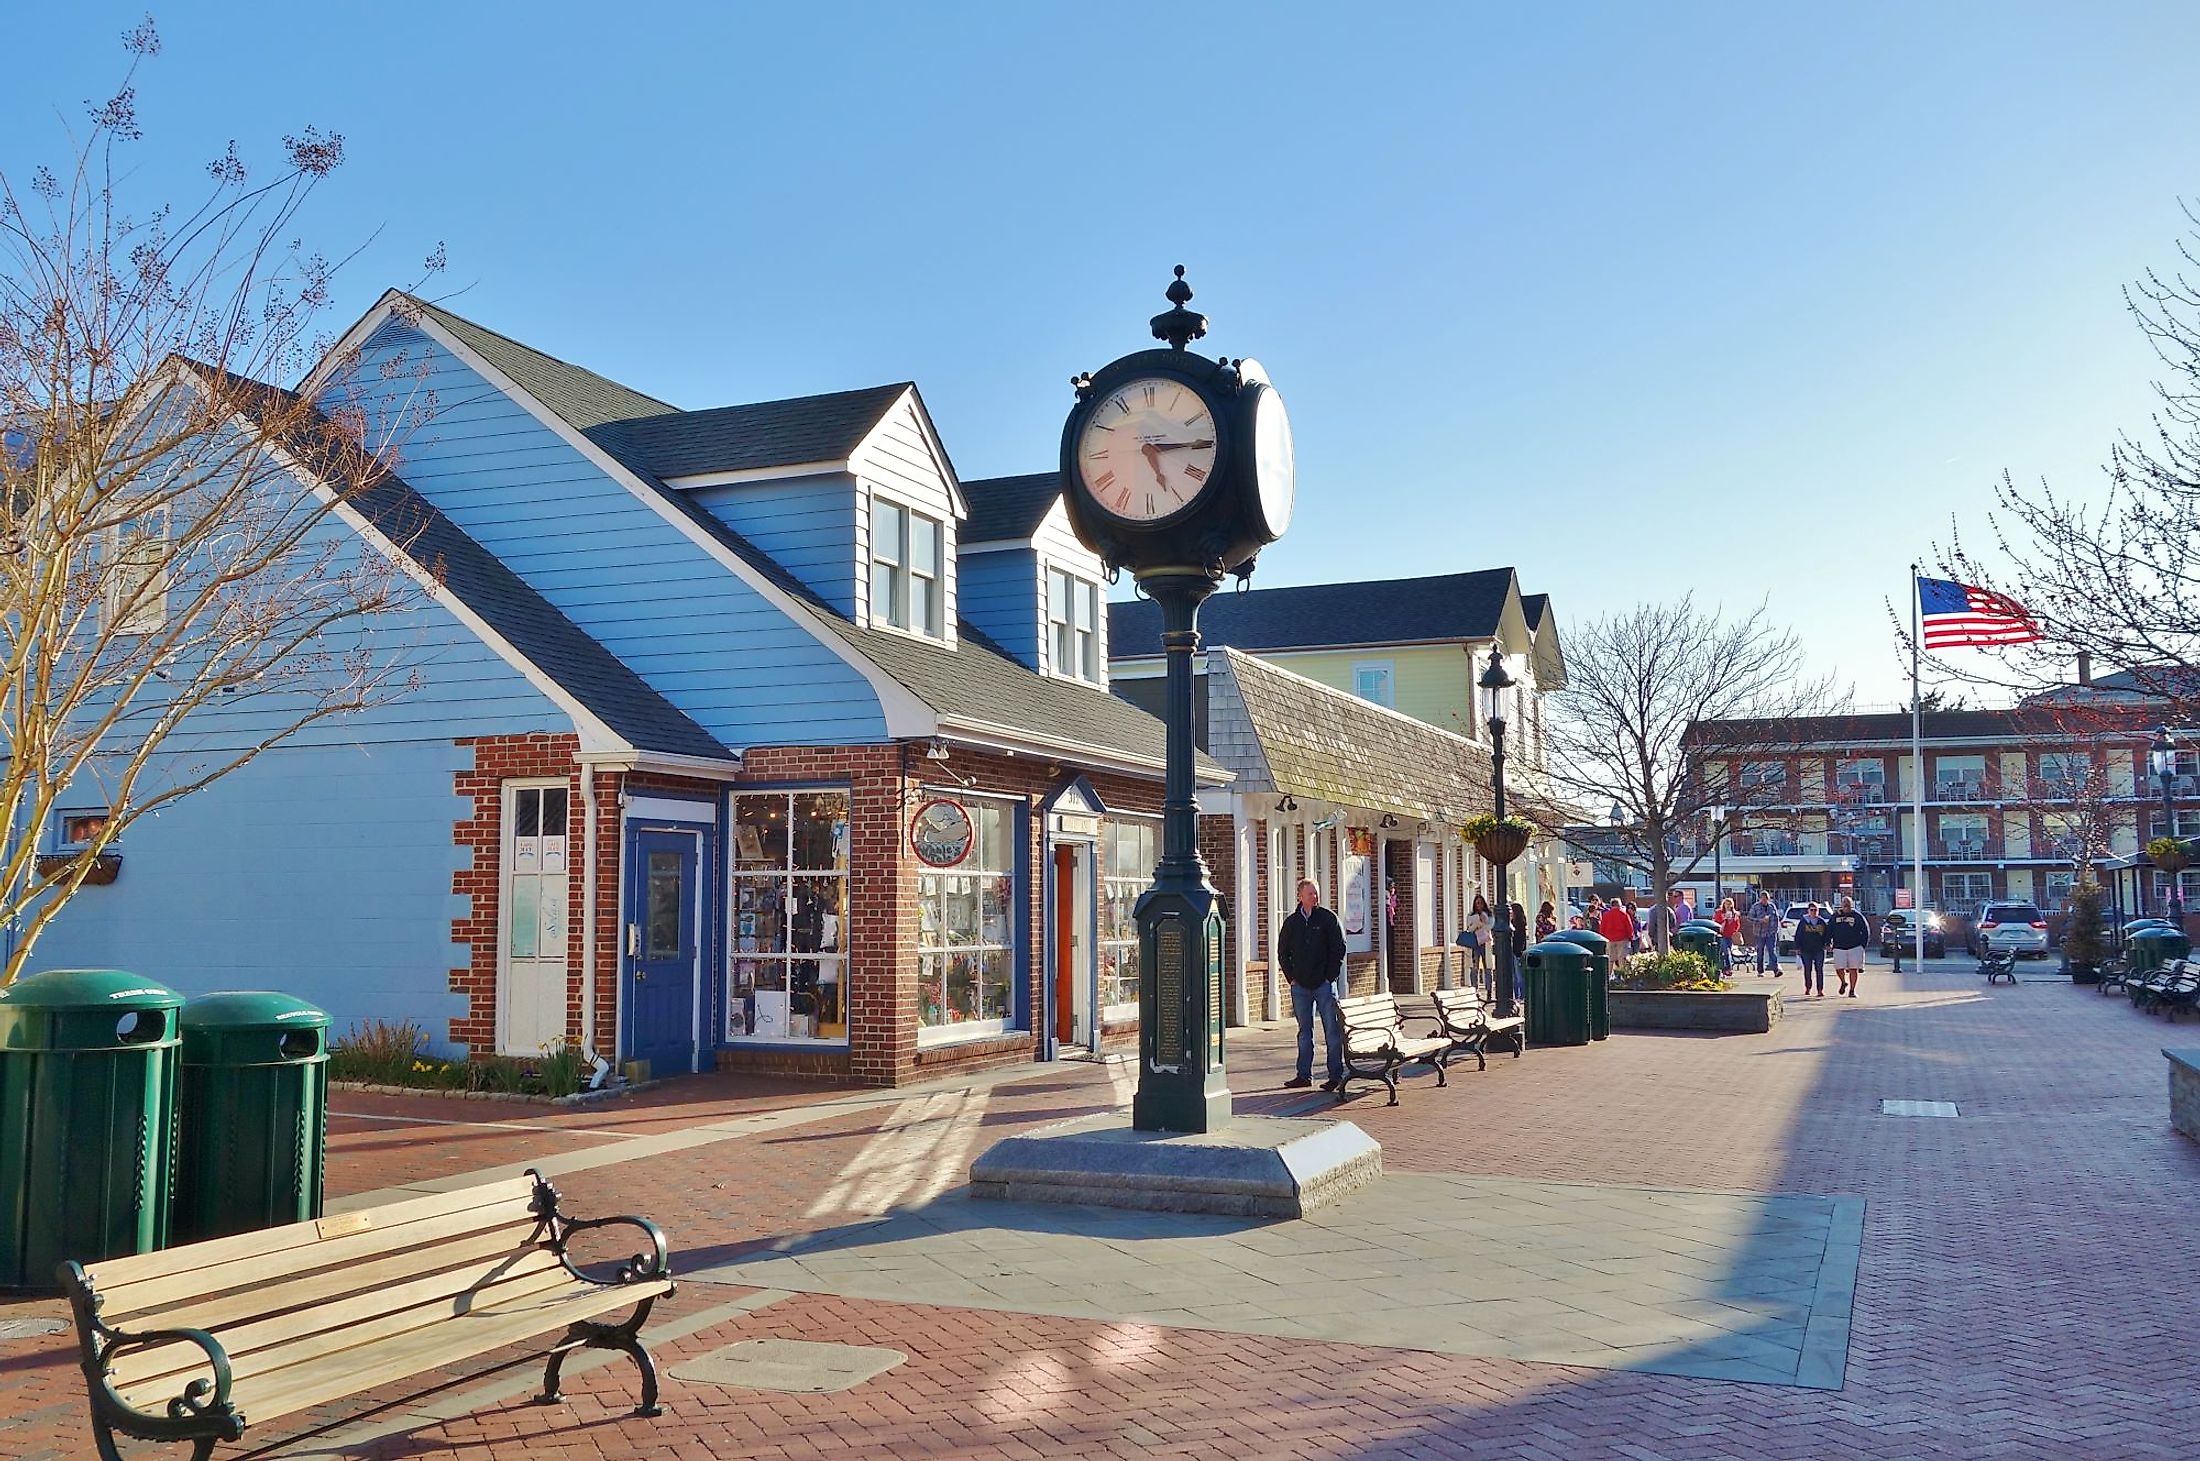 View of Washington Street Mall - a pedestrian shopping area in downtown Cape May. Editorial credit: EQRoy / Shutterstock.com